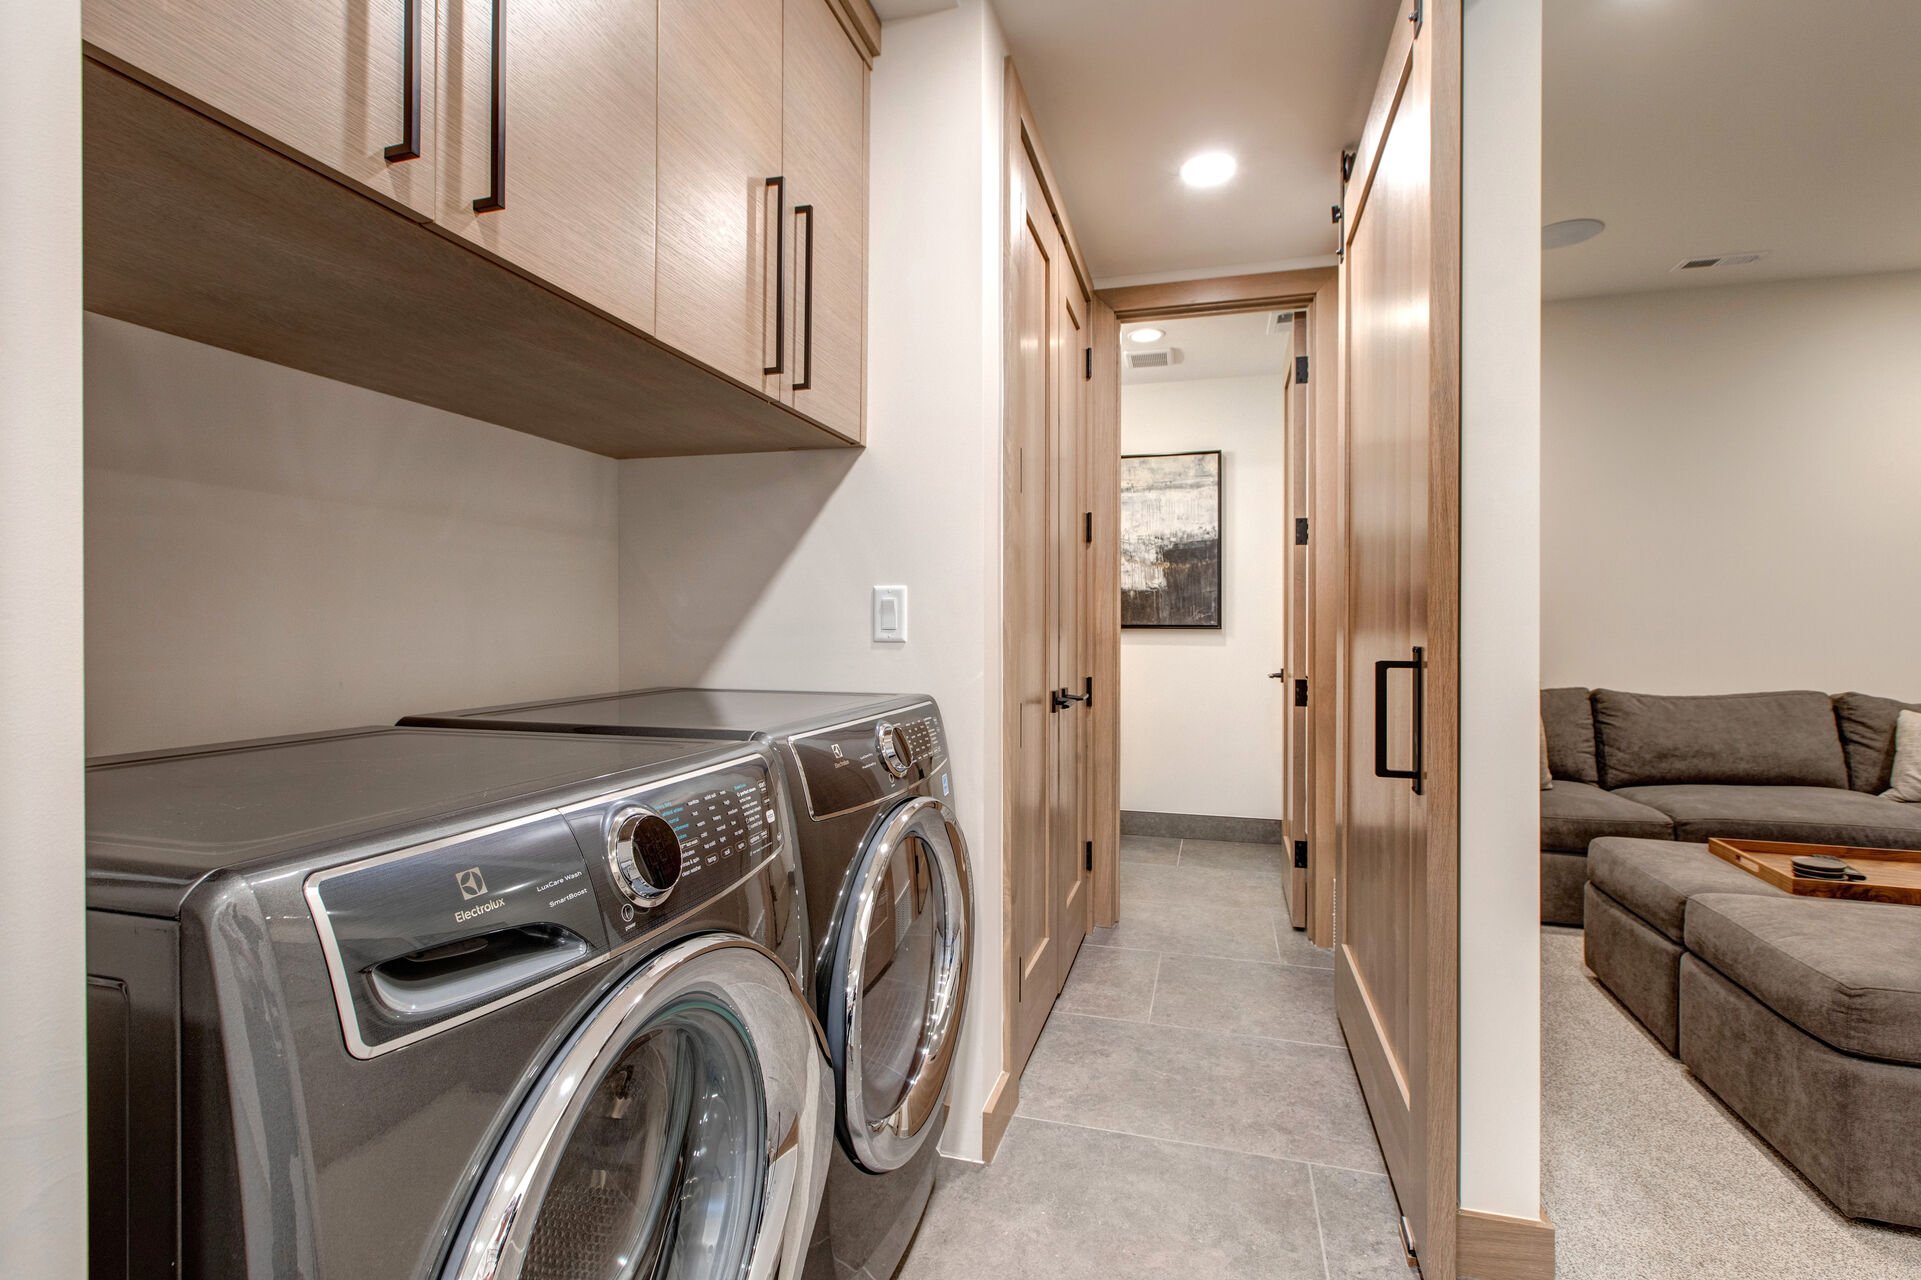 Full-sized washer and dryer units